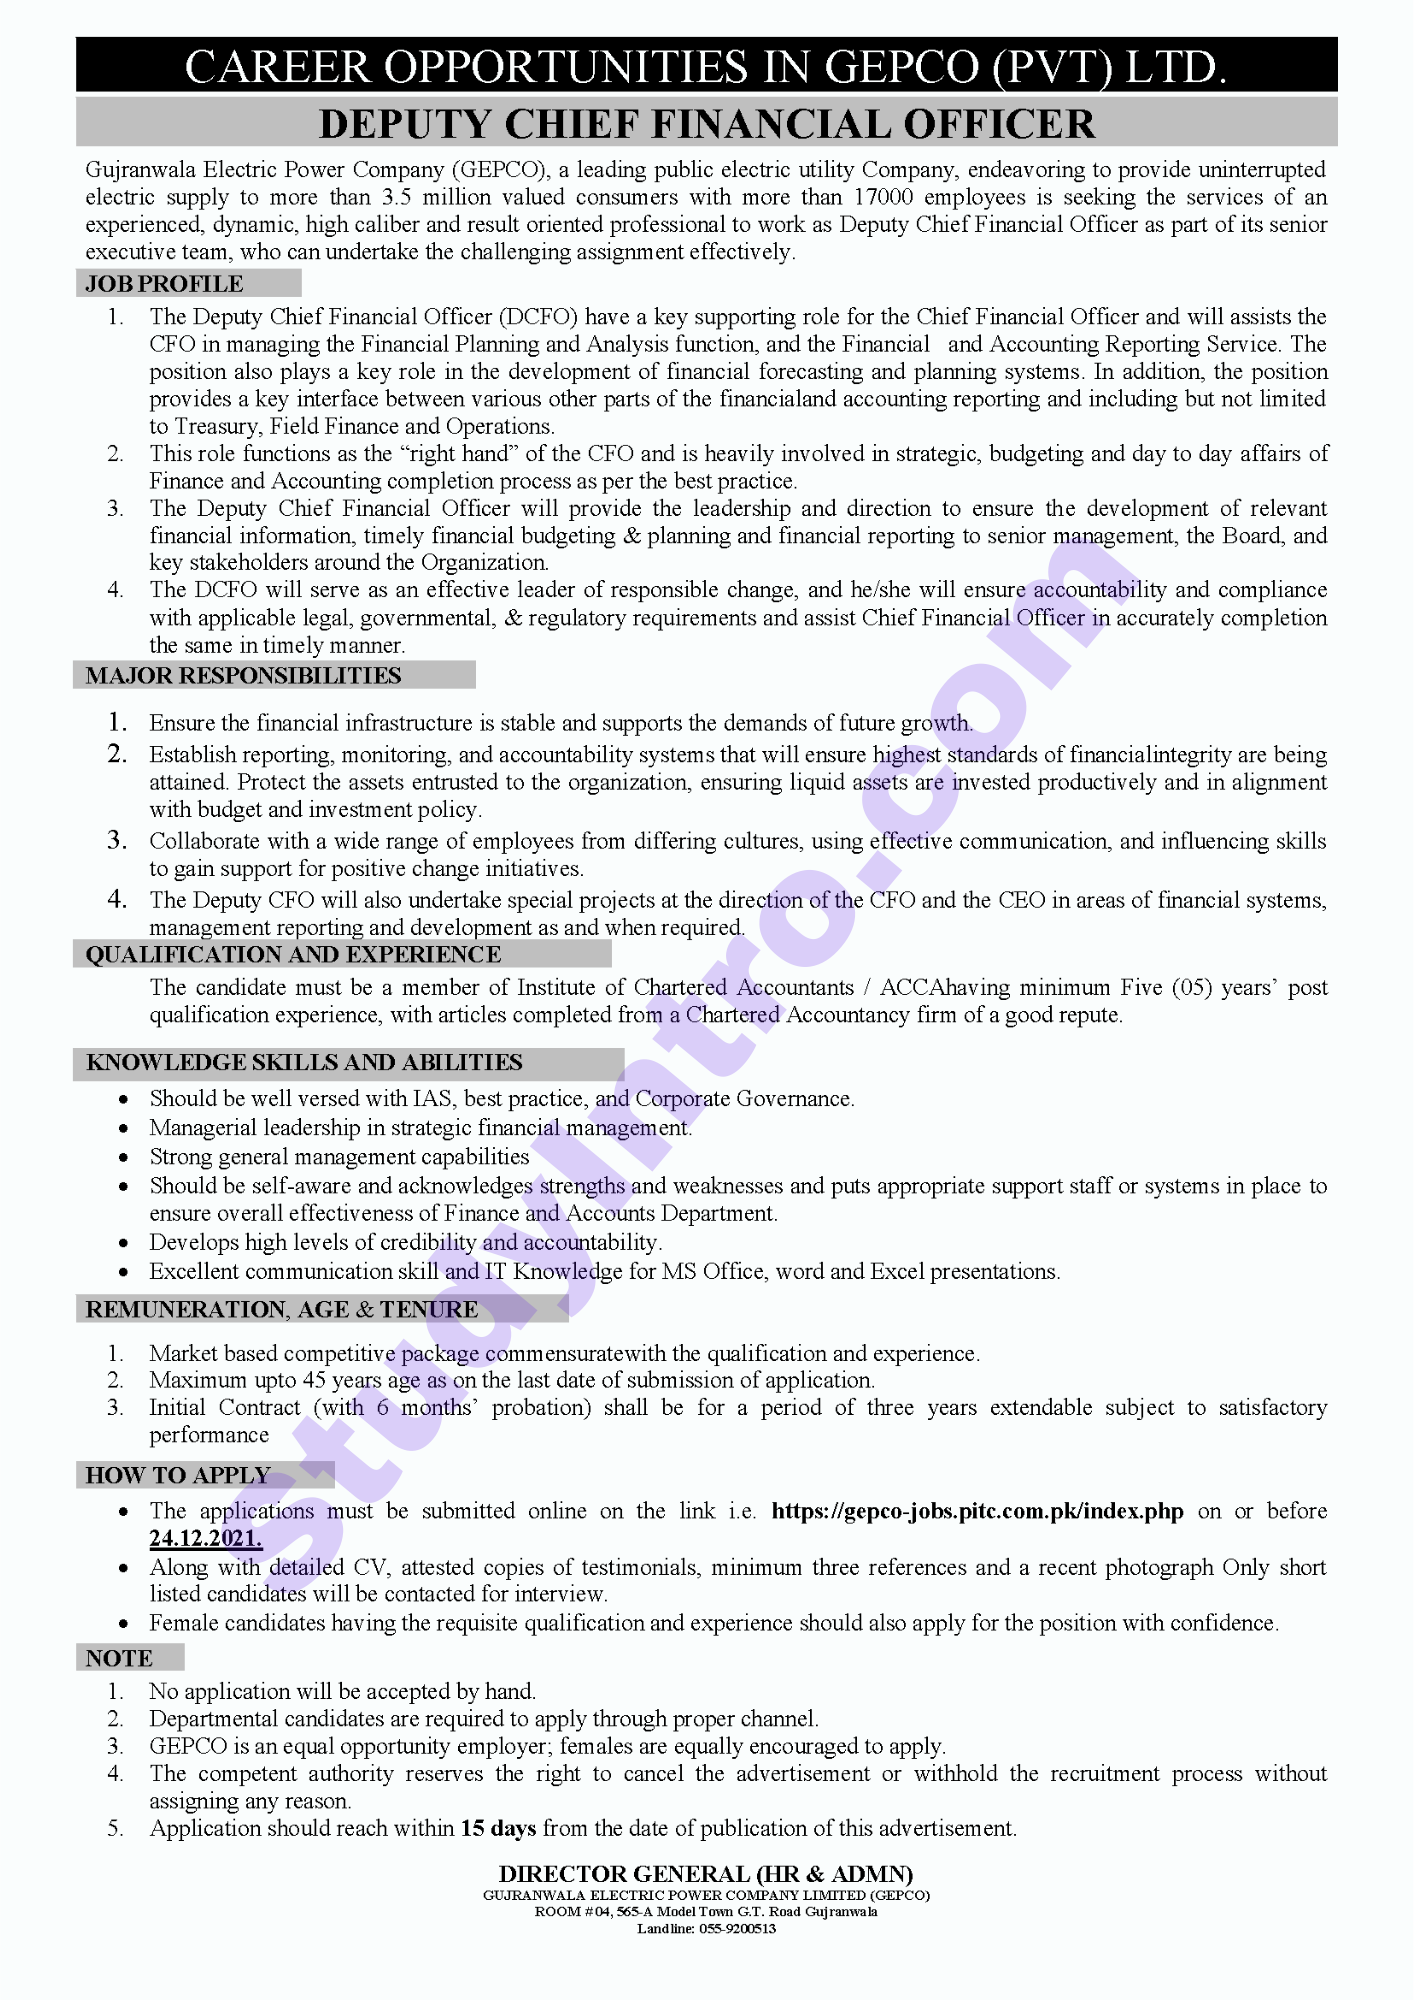 Latest Gepco Jobs 2021 in Gujranwala